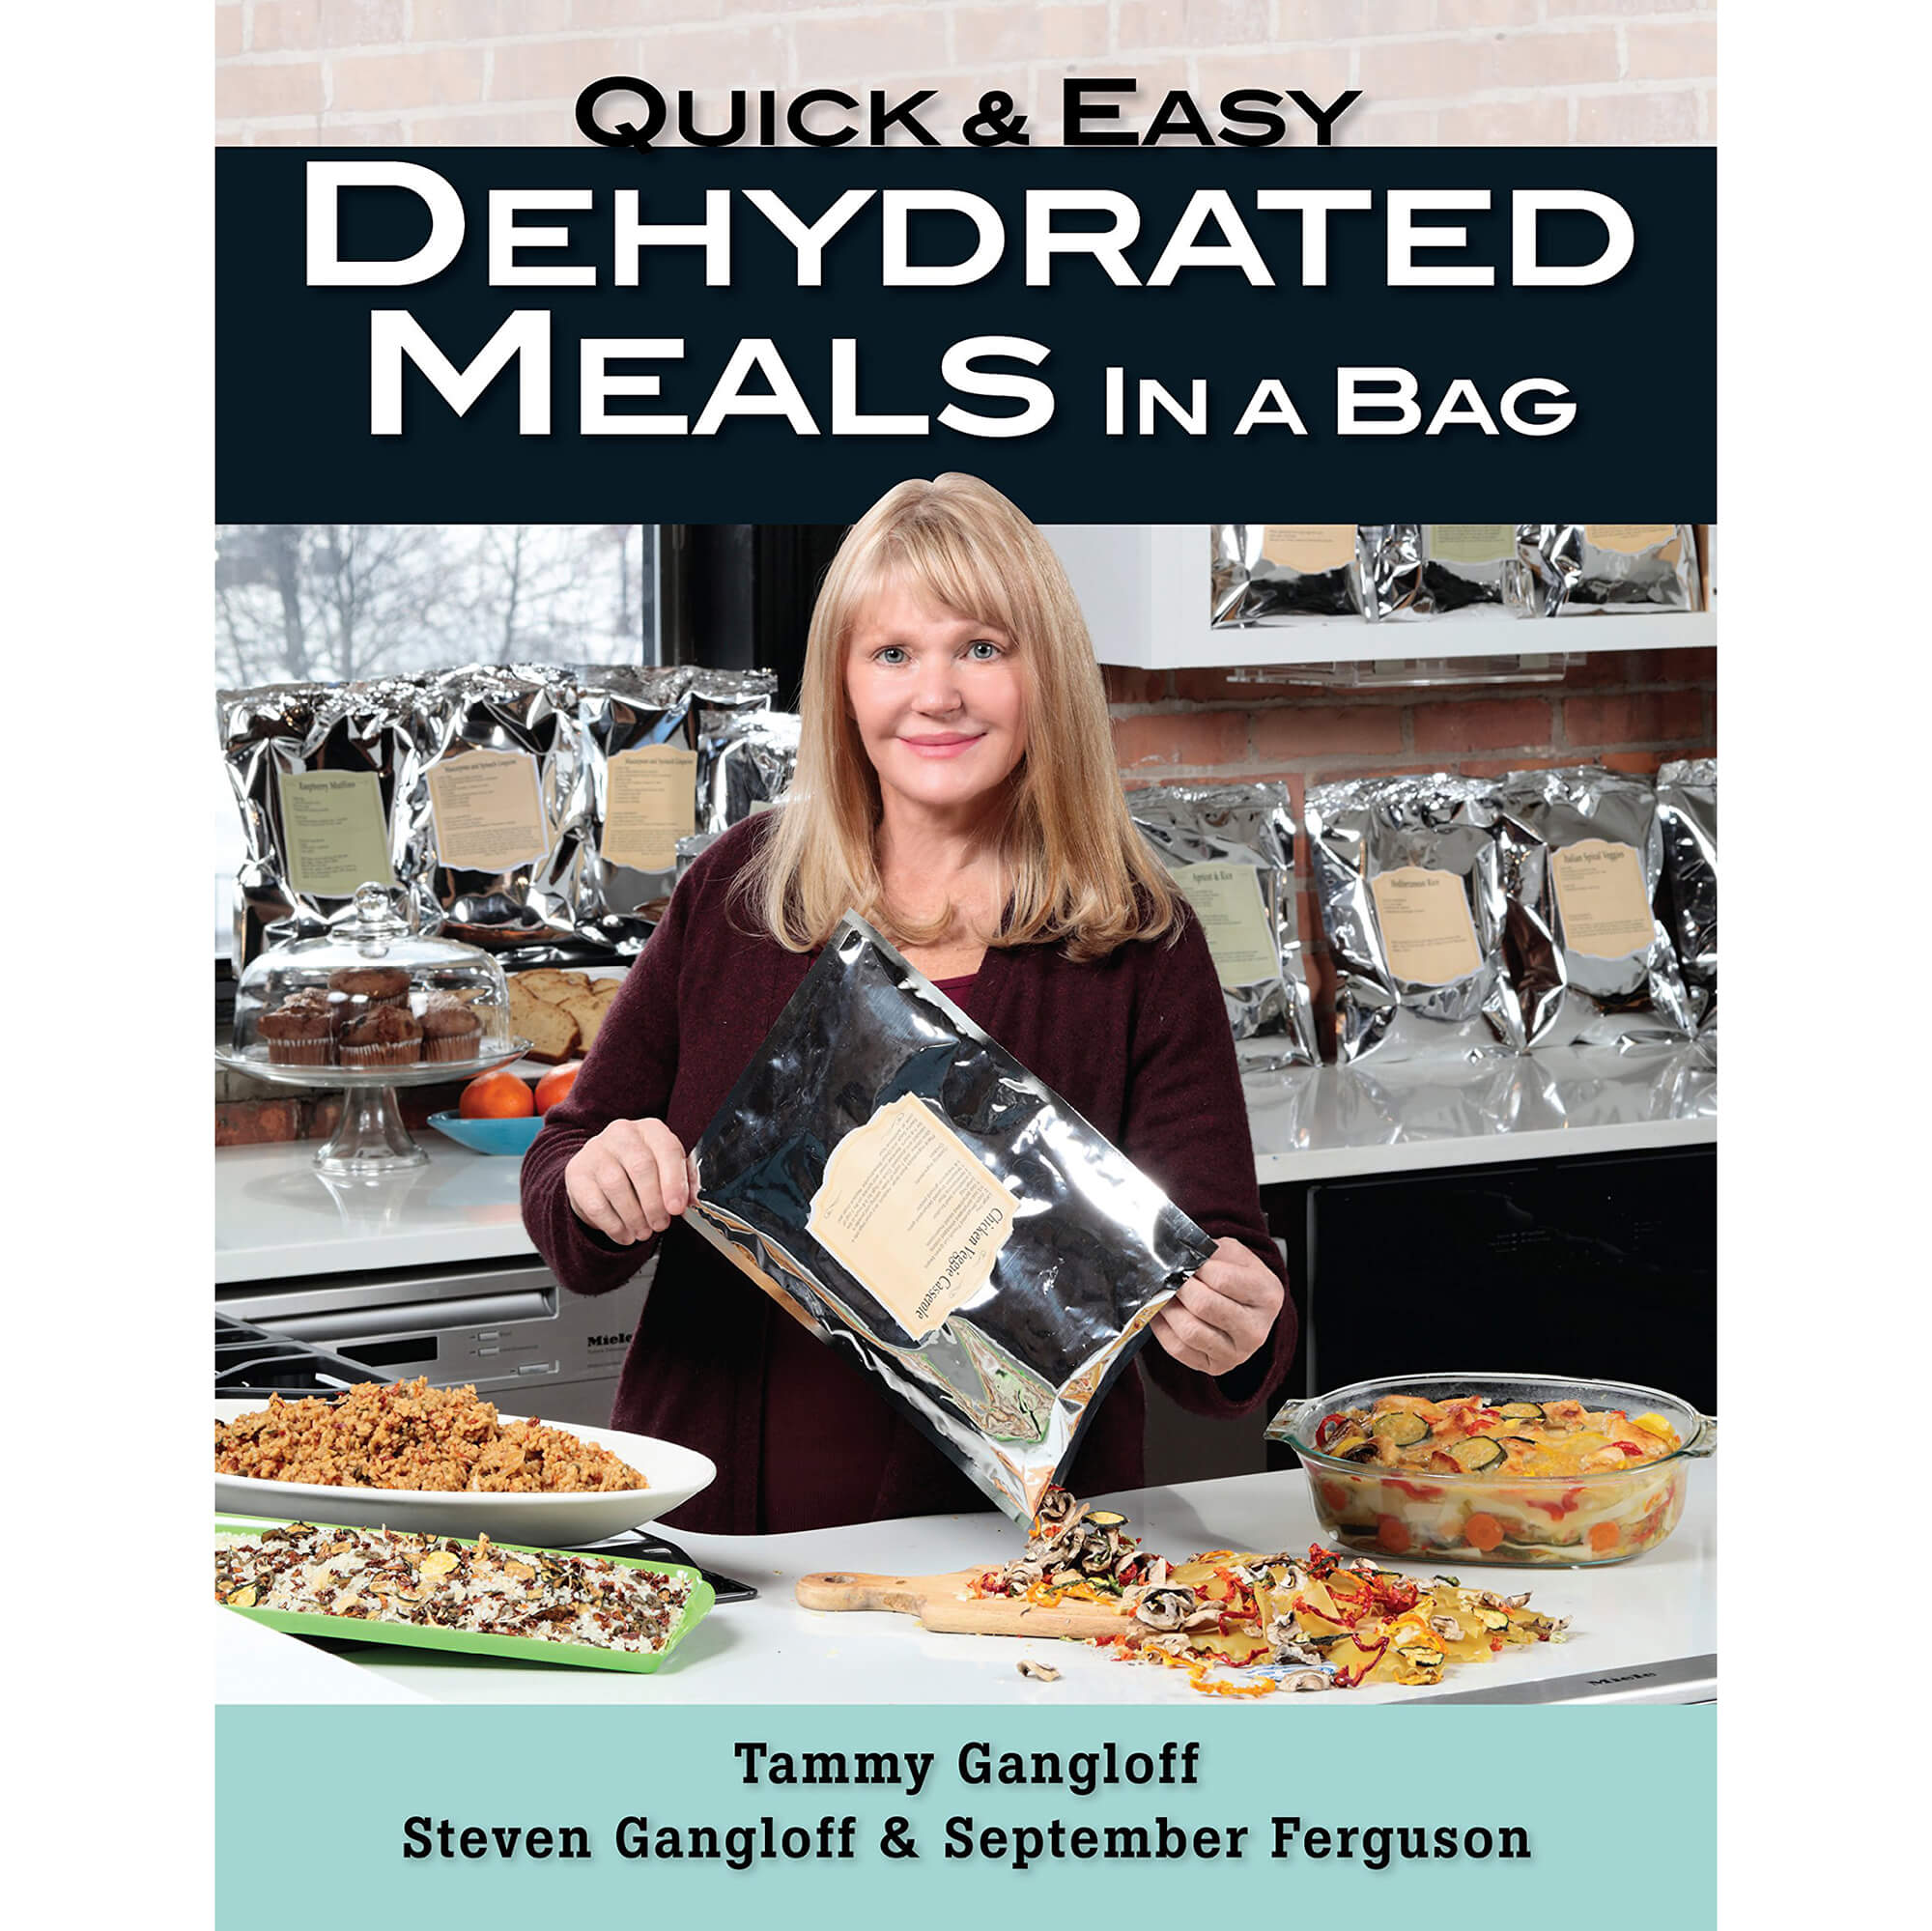 Quick and Easy Dehydrated Meals in a Bag front cover.